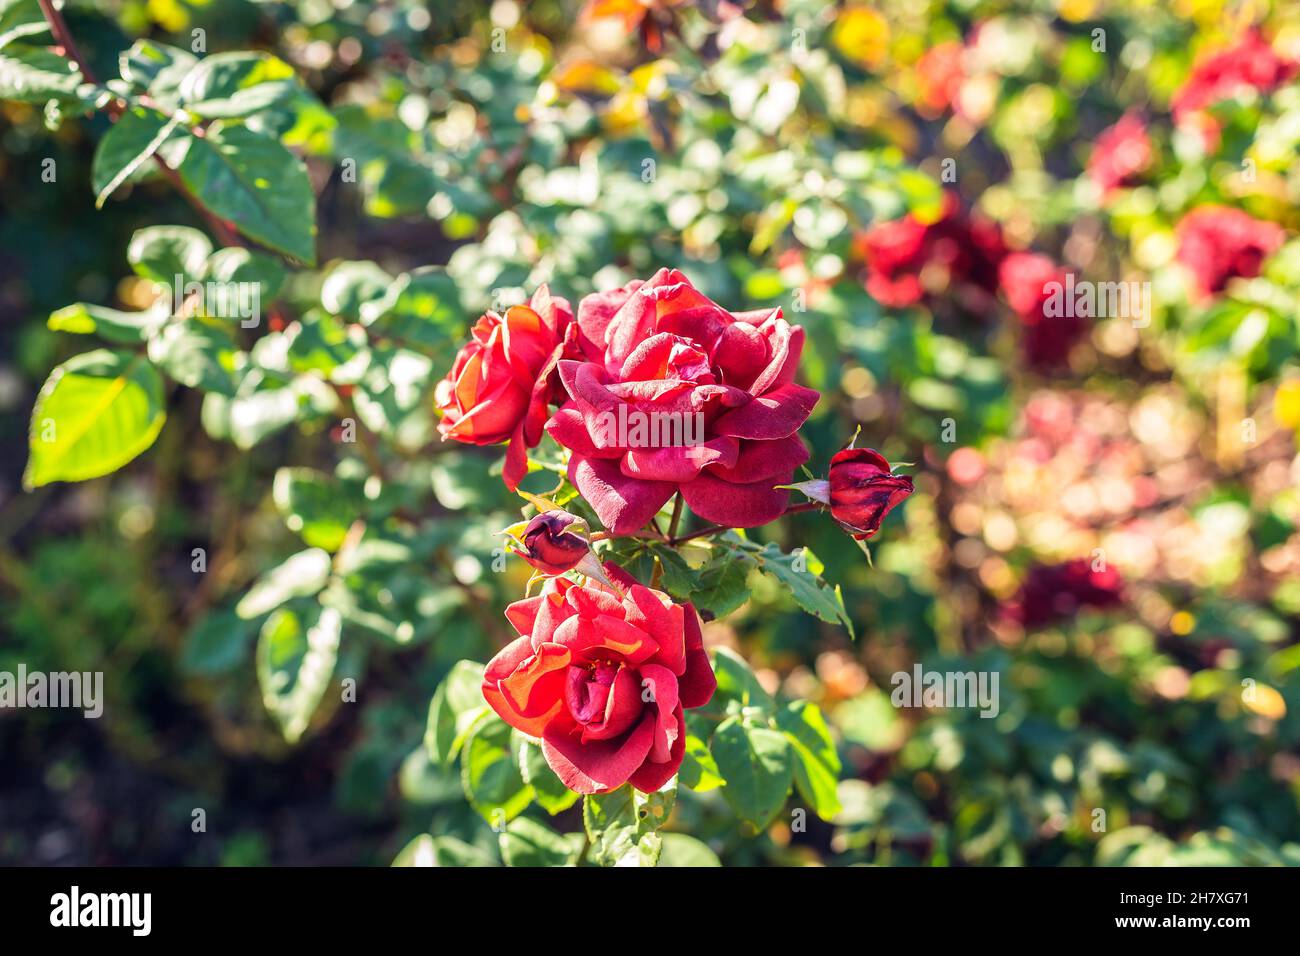 beautiful red rose flowers flowering in the green garden Stock Photo